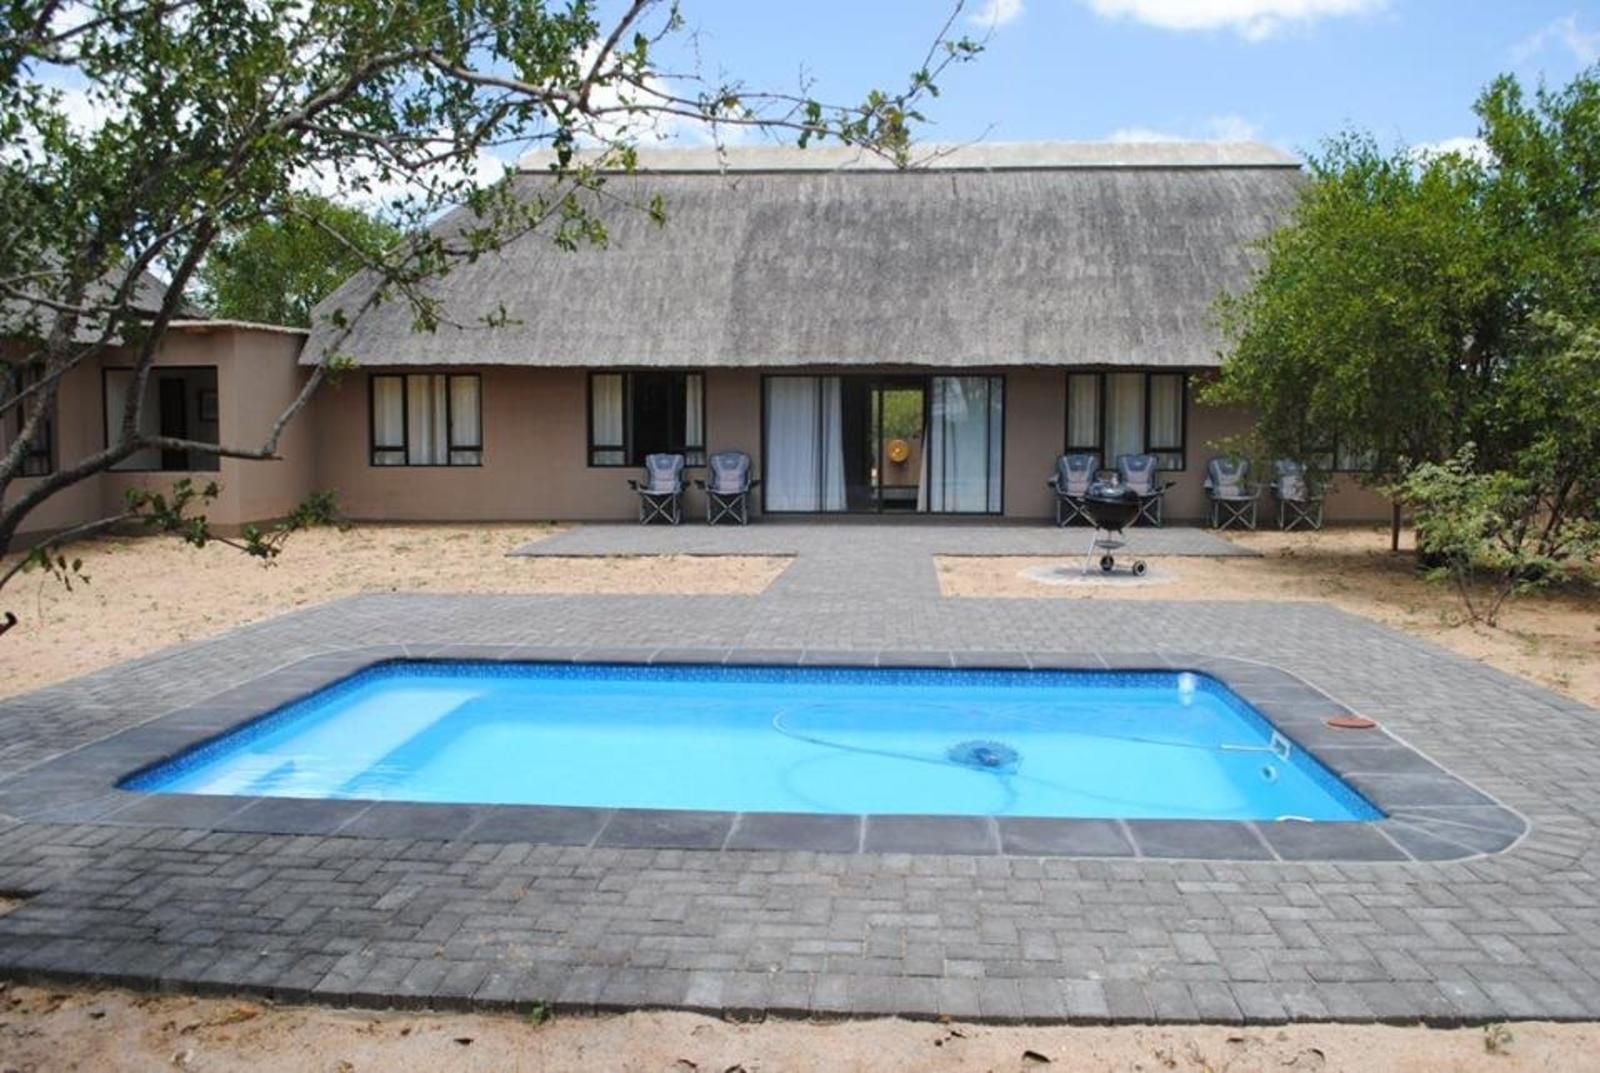 Shongane Safaris Hoedspruit Limpopo Province South Africa House, Building, Architecture, Swimming Pool